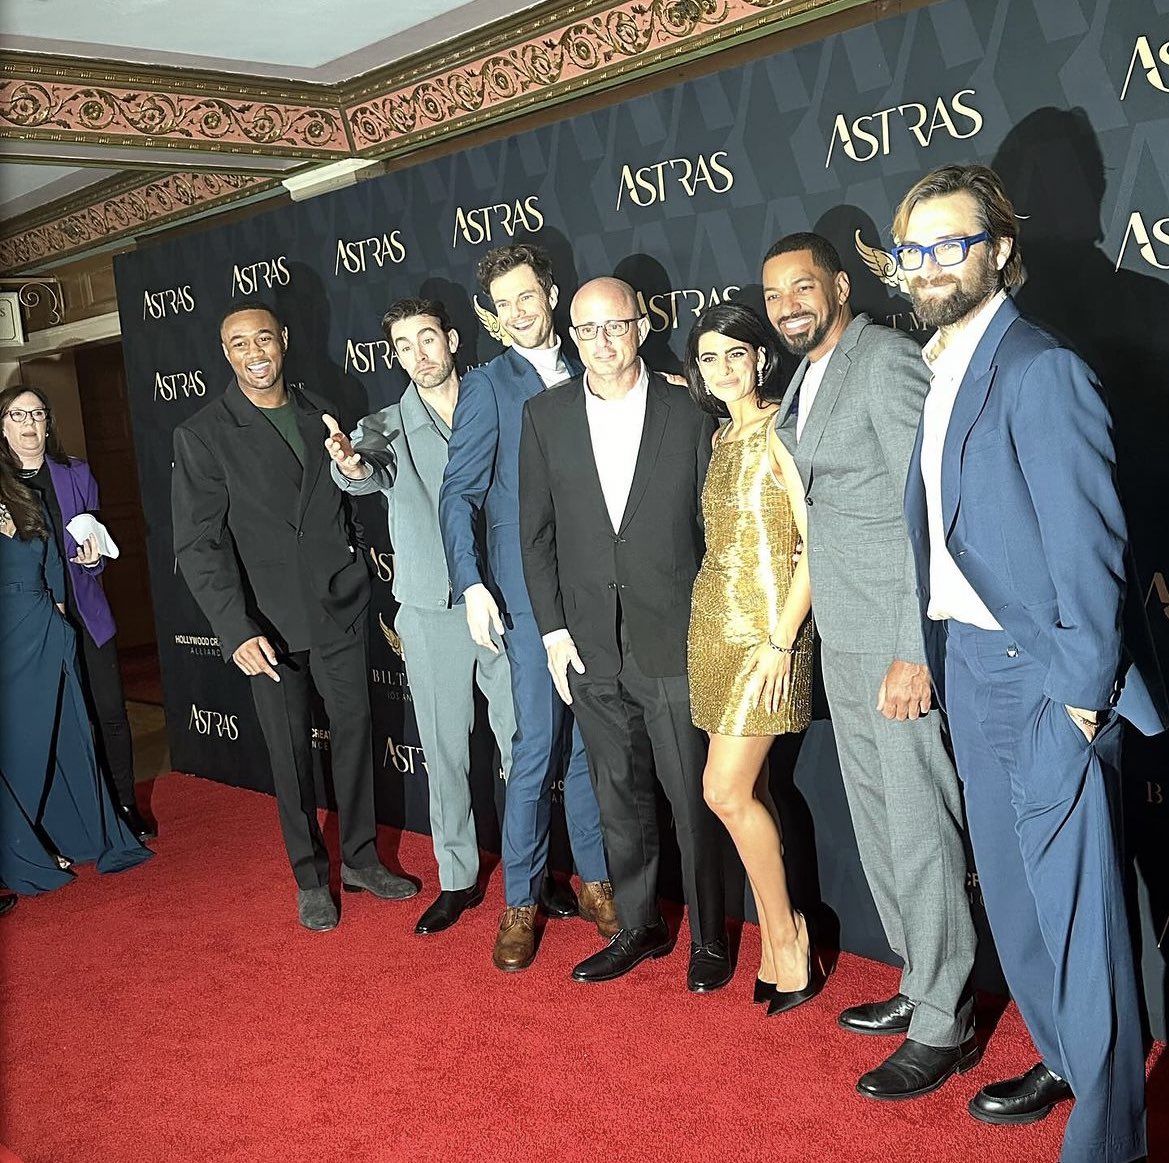 chace crawford and the cast of the boys at the hca astra tv awards yesterday. (jan. 08, 2024)

via nrjohnspartan & jessietusher IG